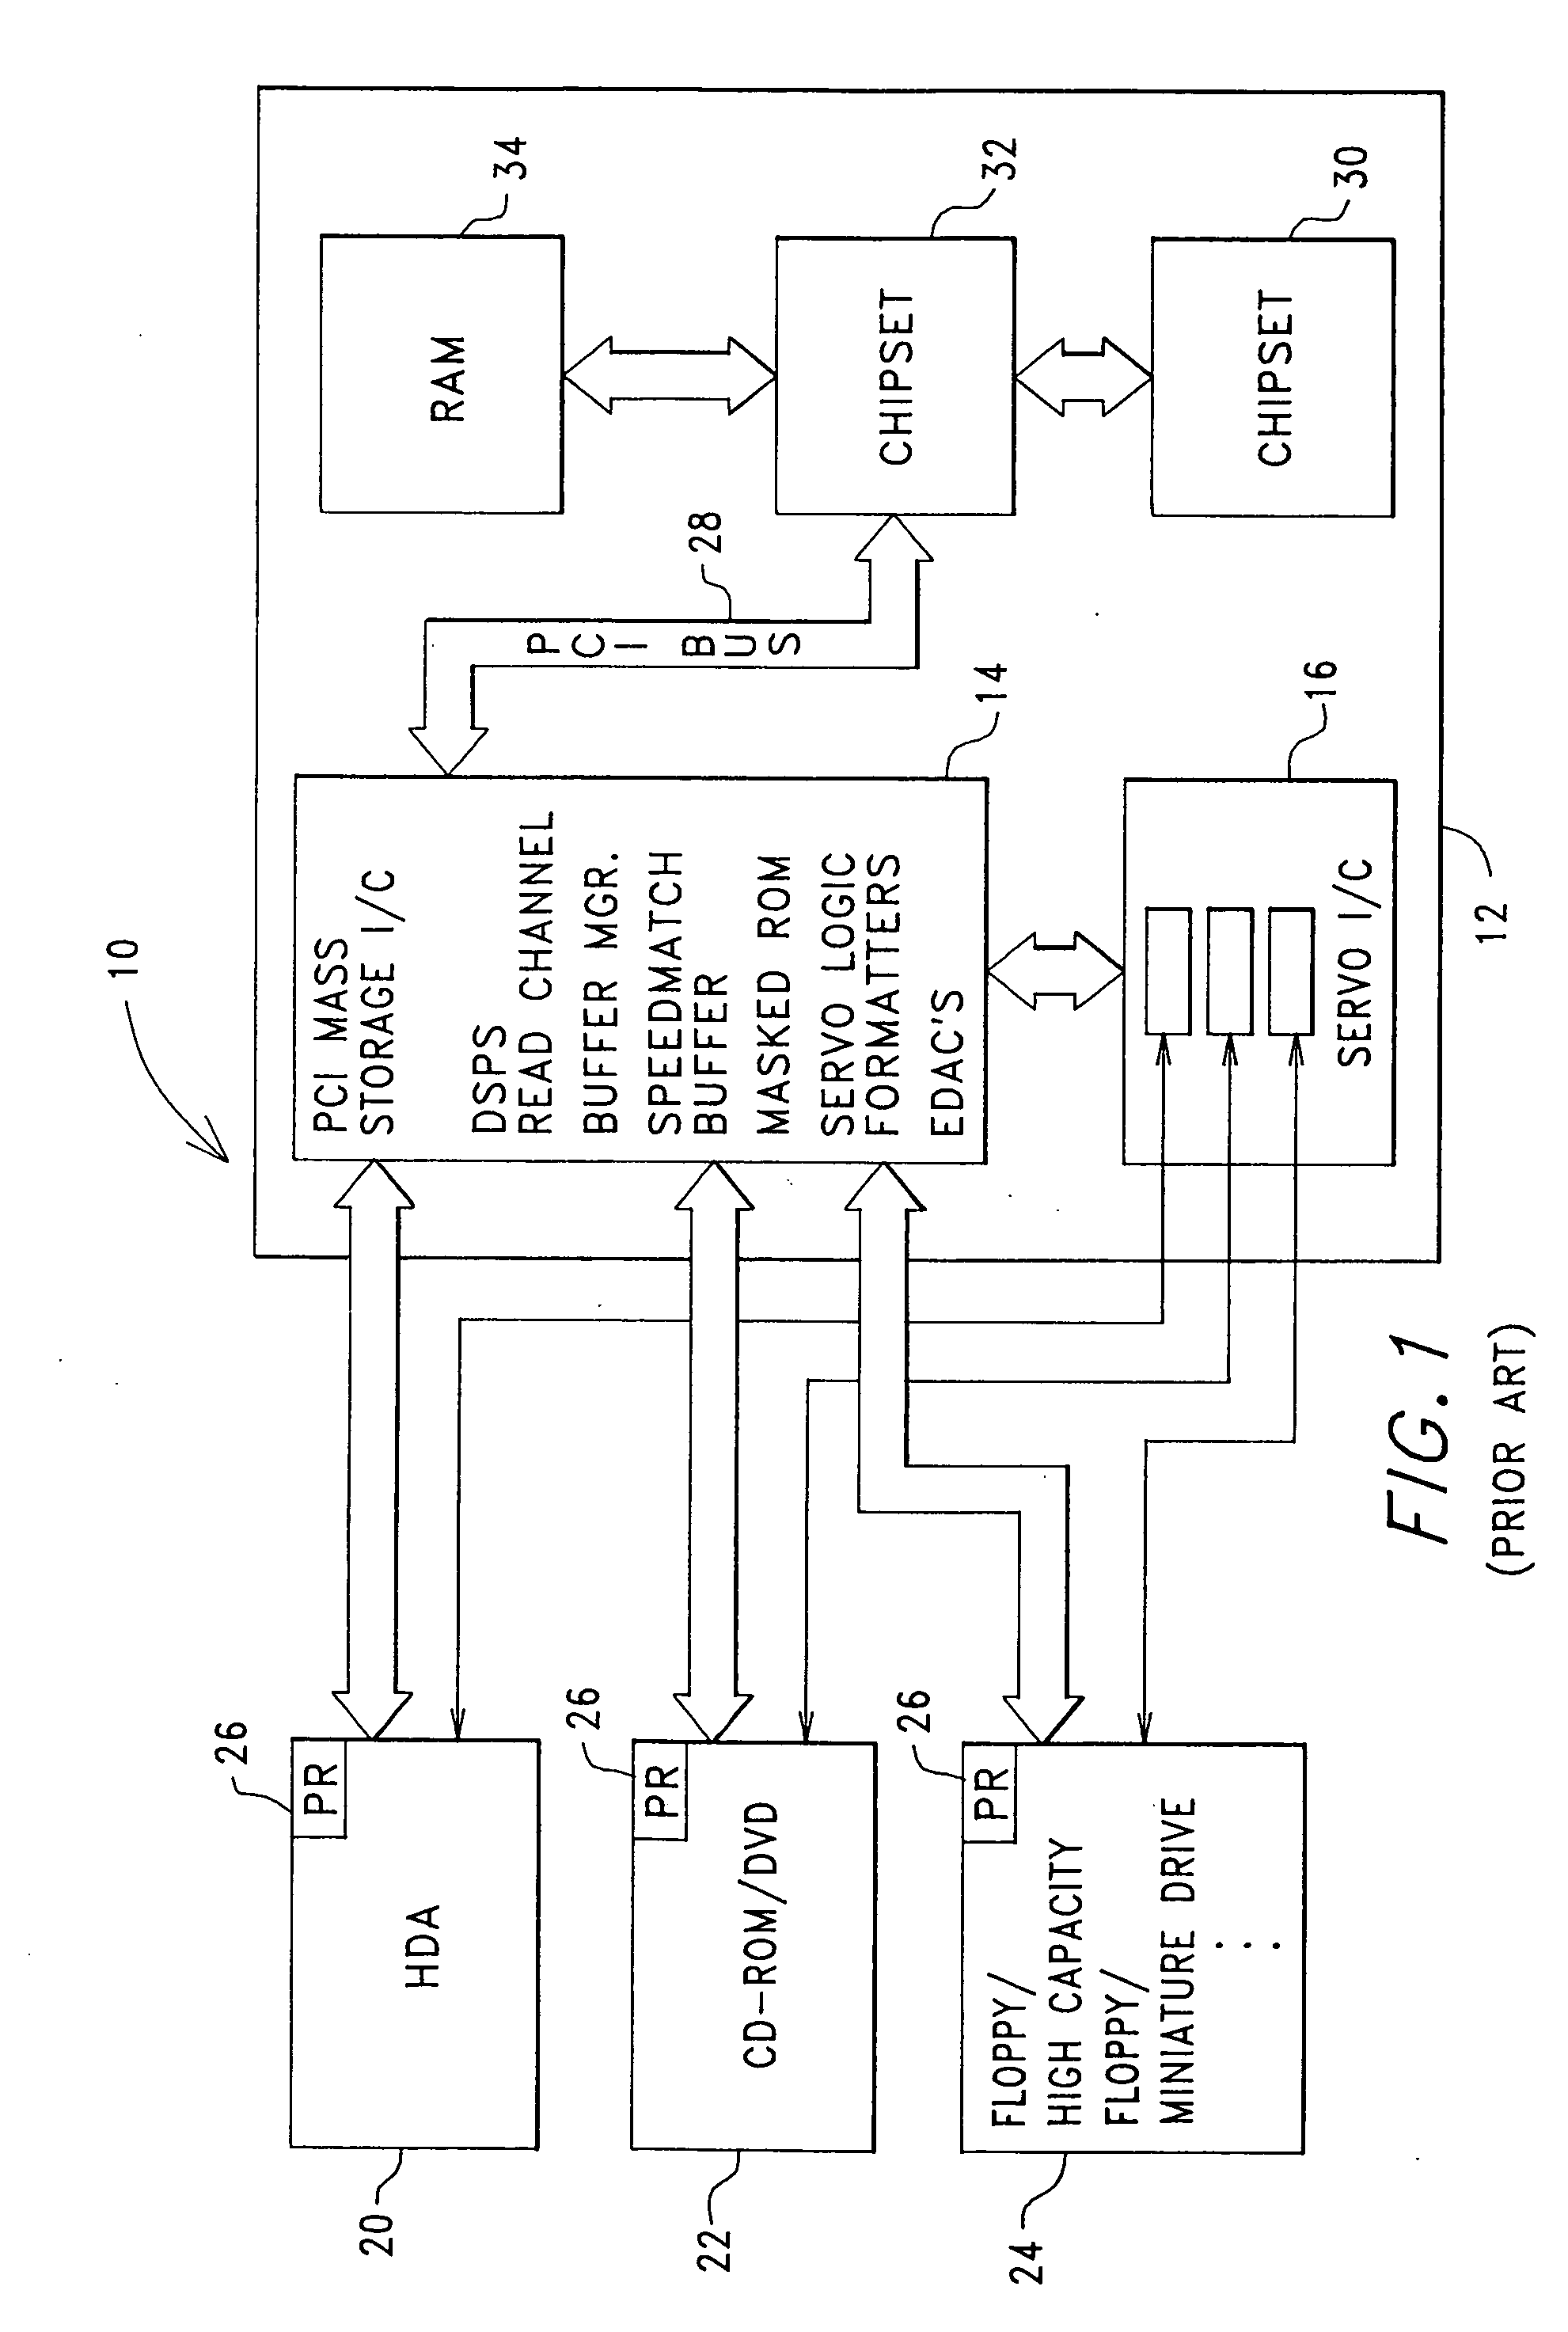 Digital device configuration and method